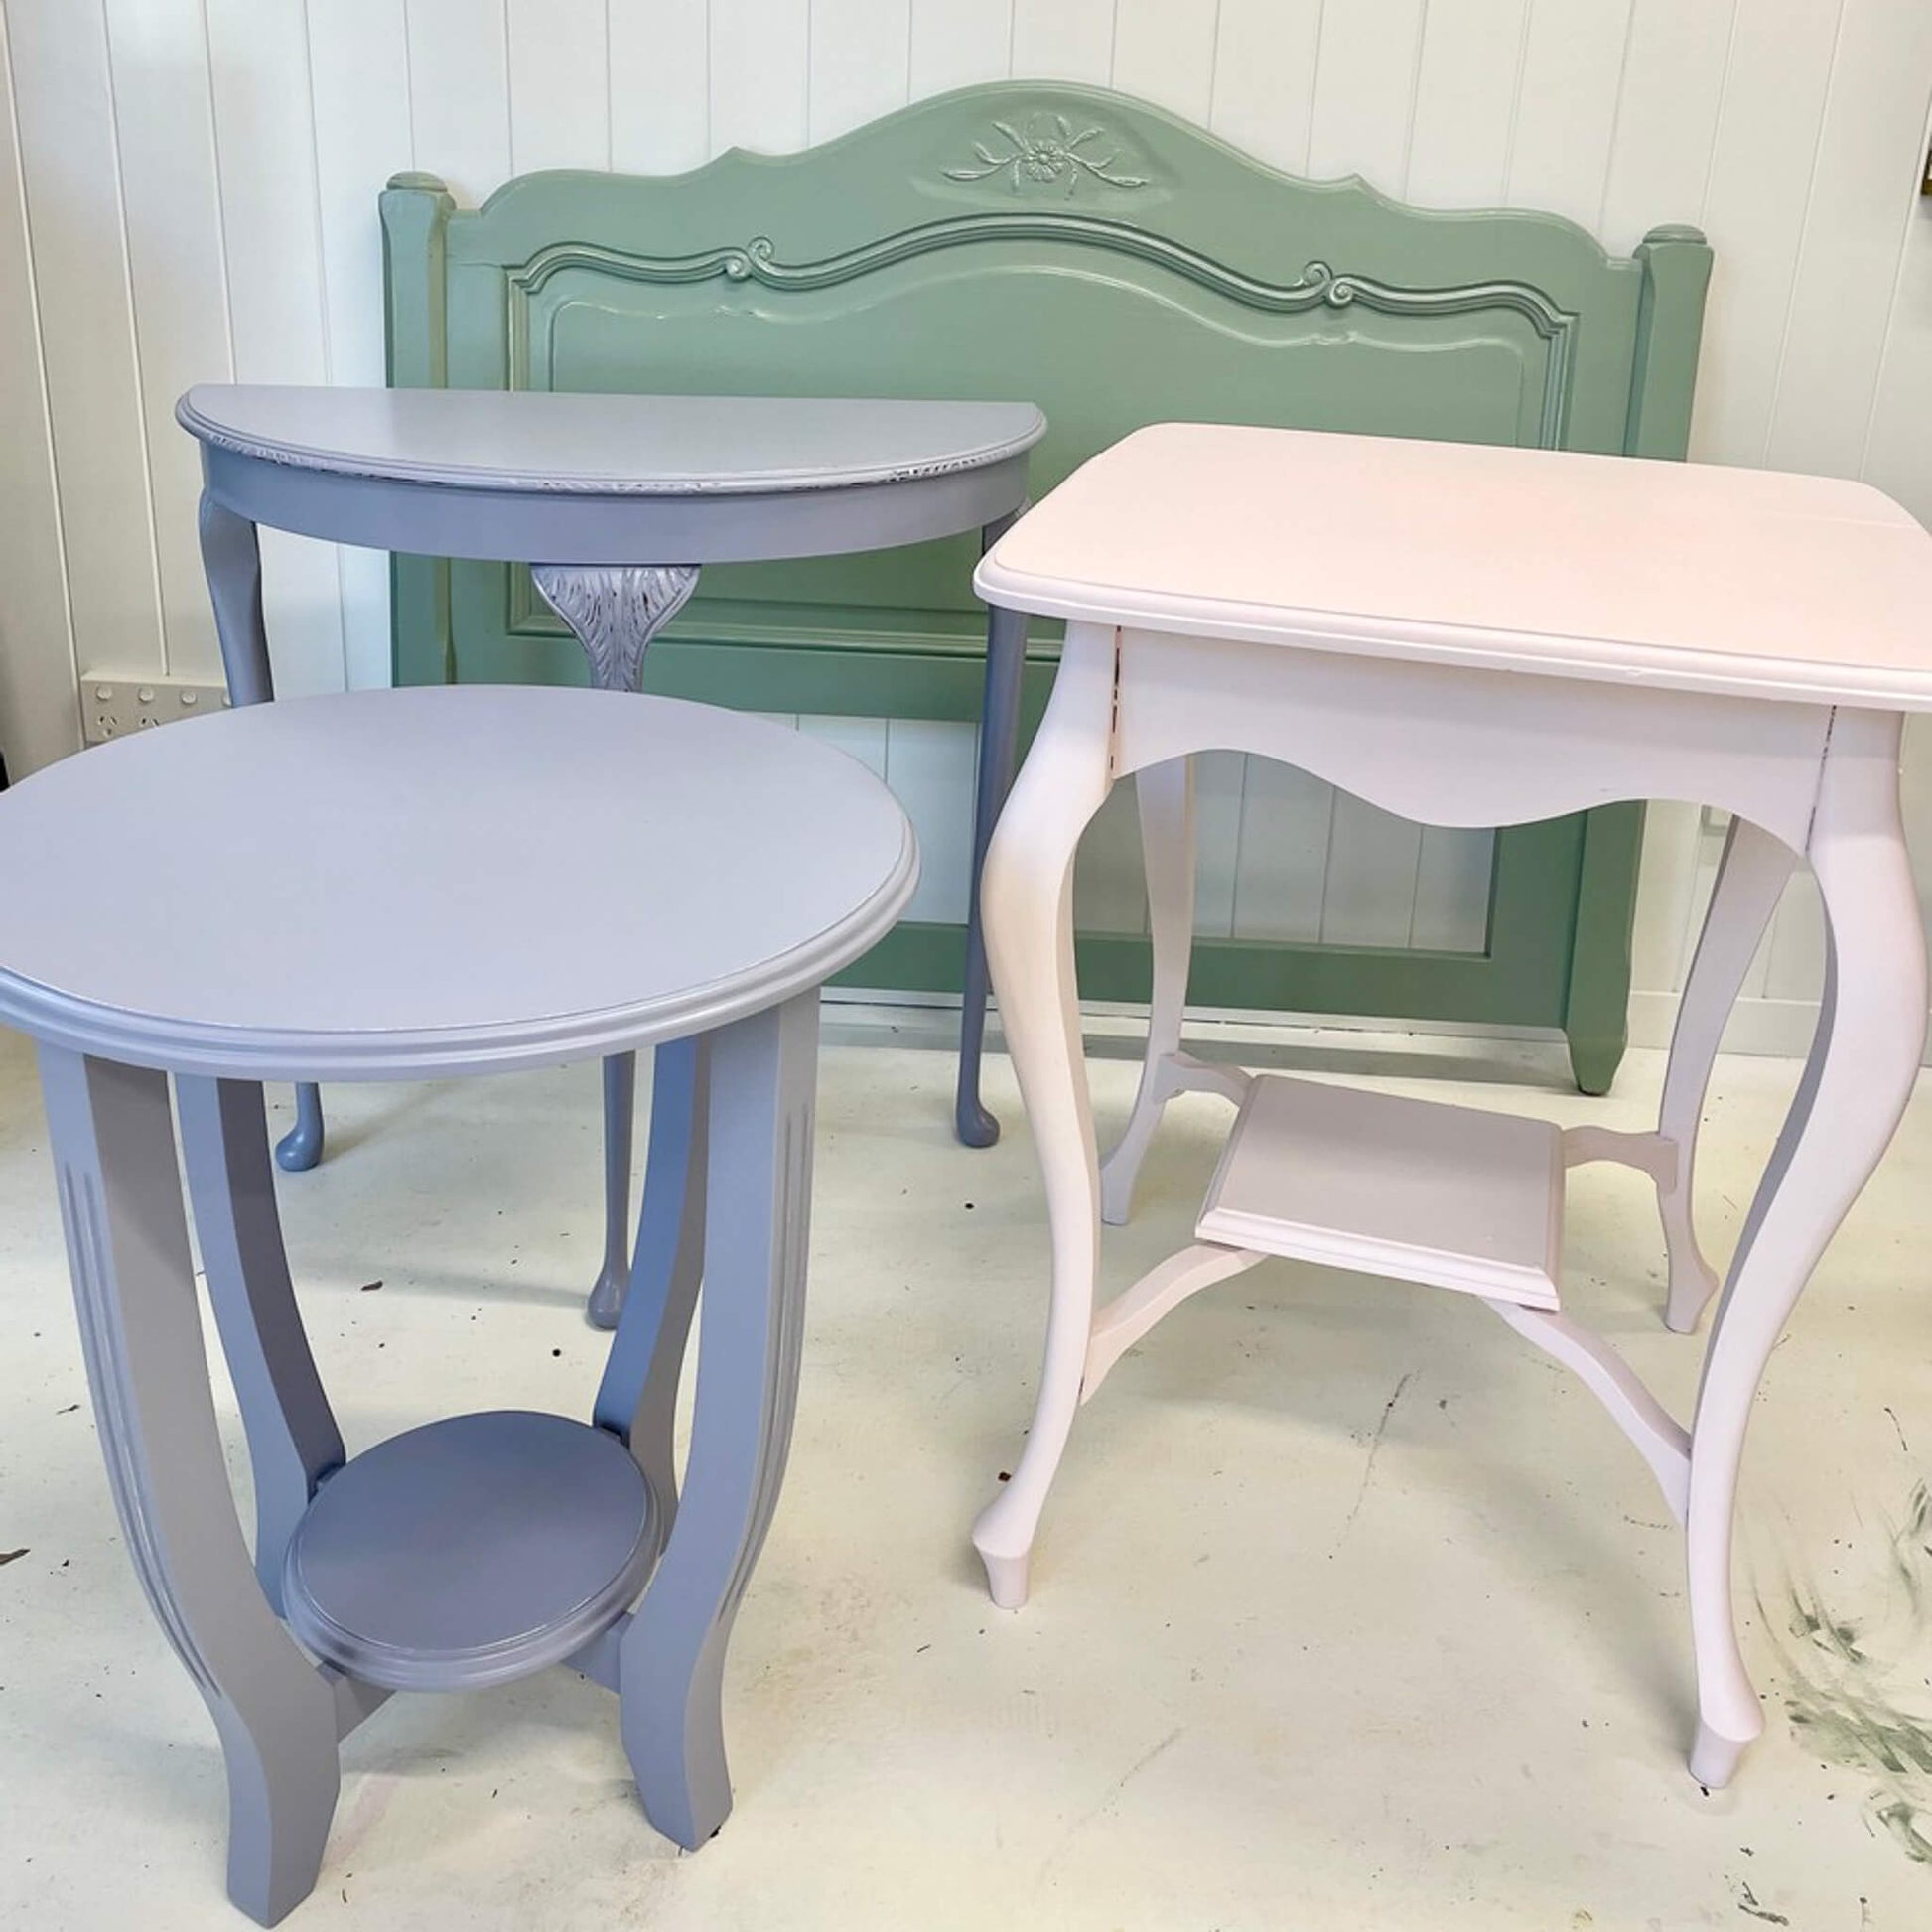 Collection of furniture painted with Blake & Taylor Chalk Furniture Paint in colours Pink, Toulouse and Kettle Green